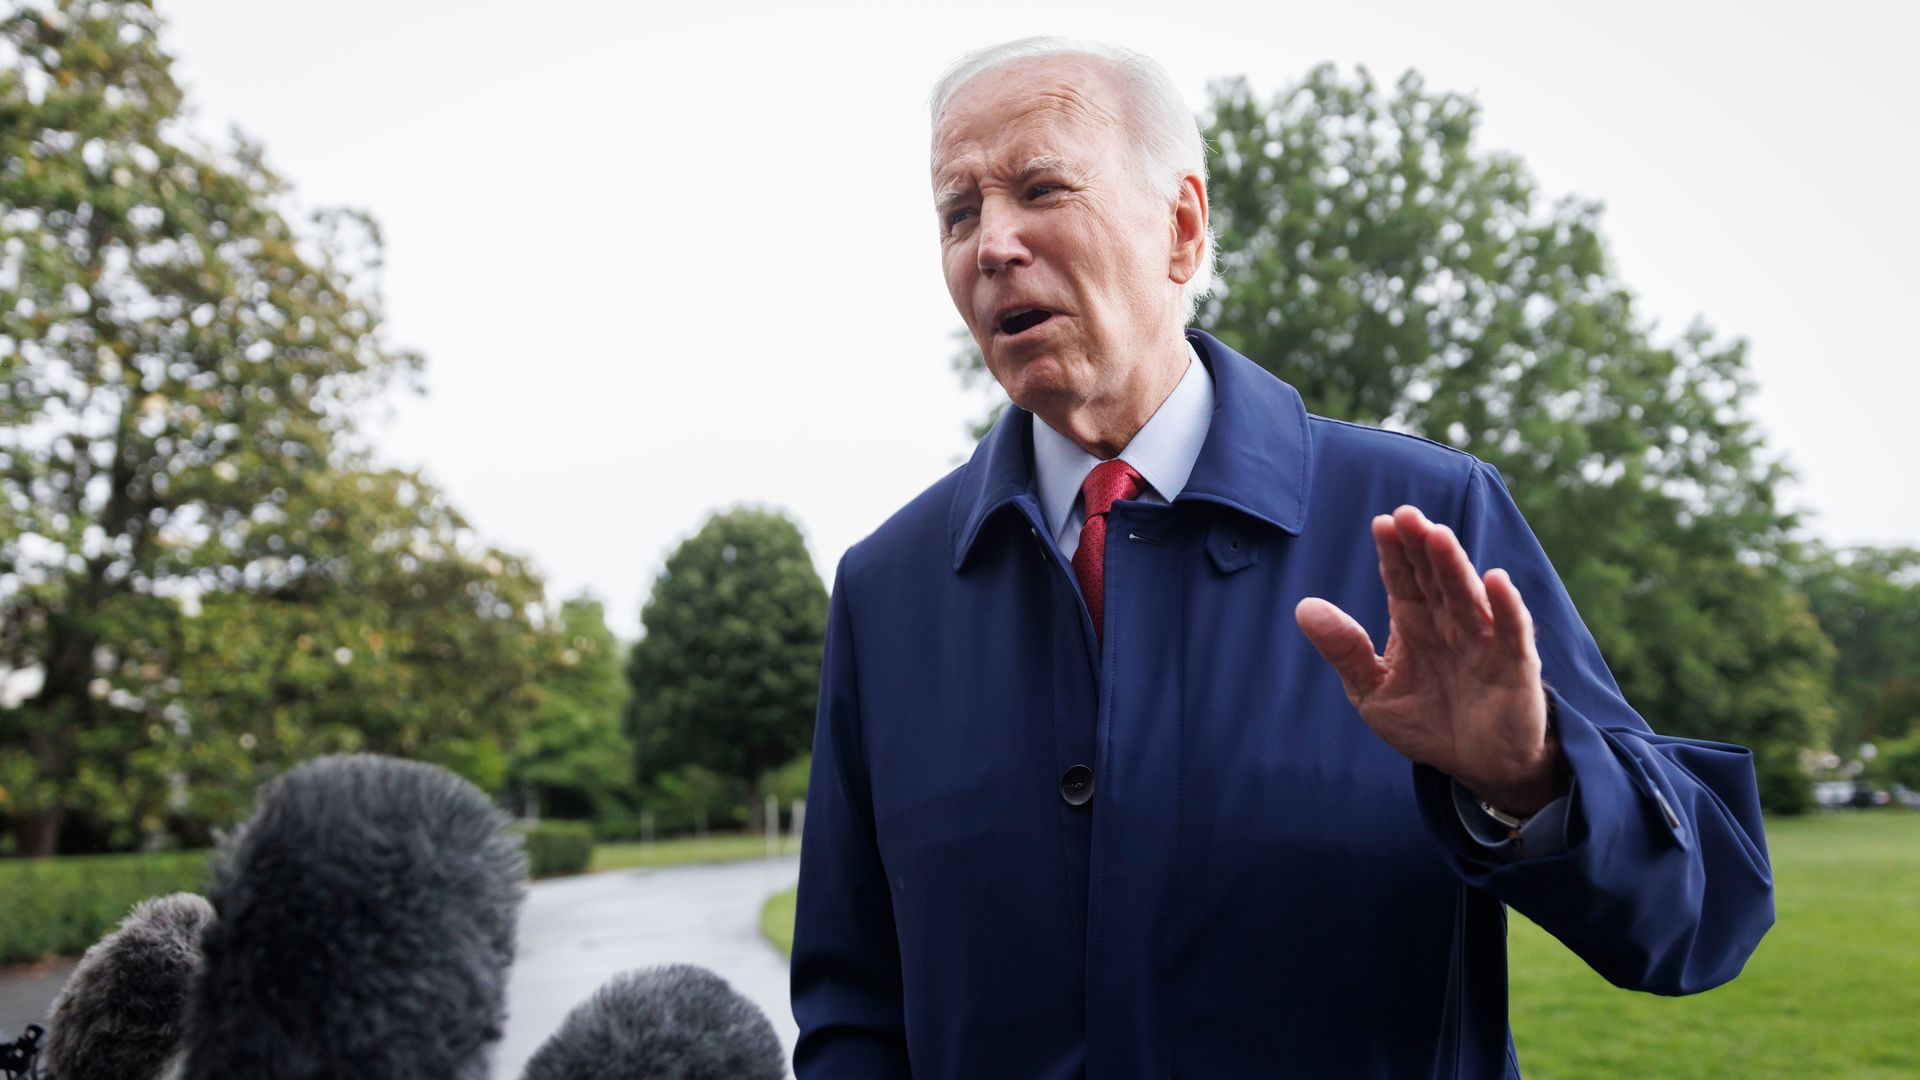 President Joe Biden speaks to members of the media on the South Lawn of the White House before boarding Marine One in Washington, DC, US, on Monday, May 29.